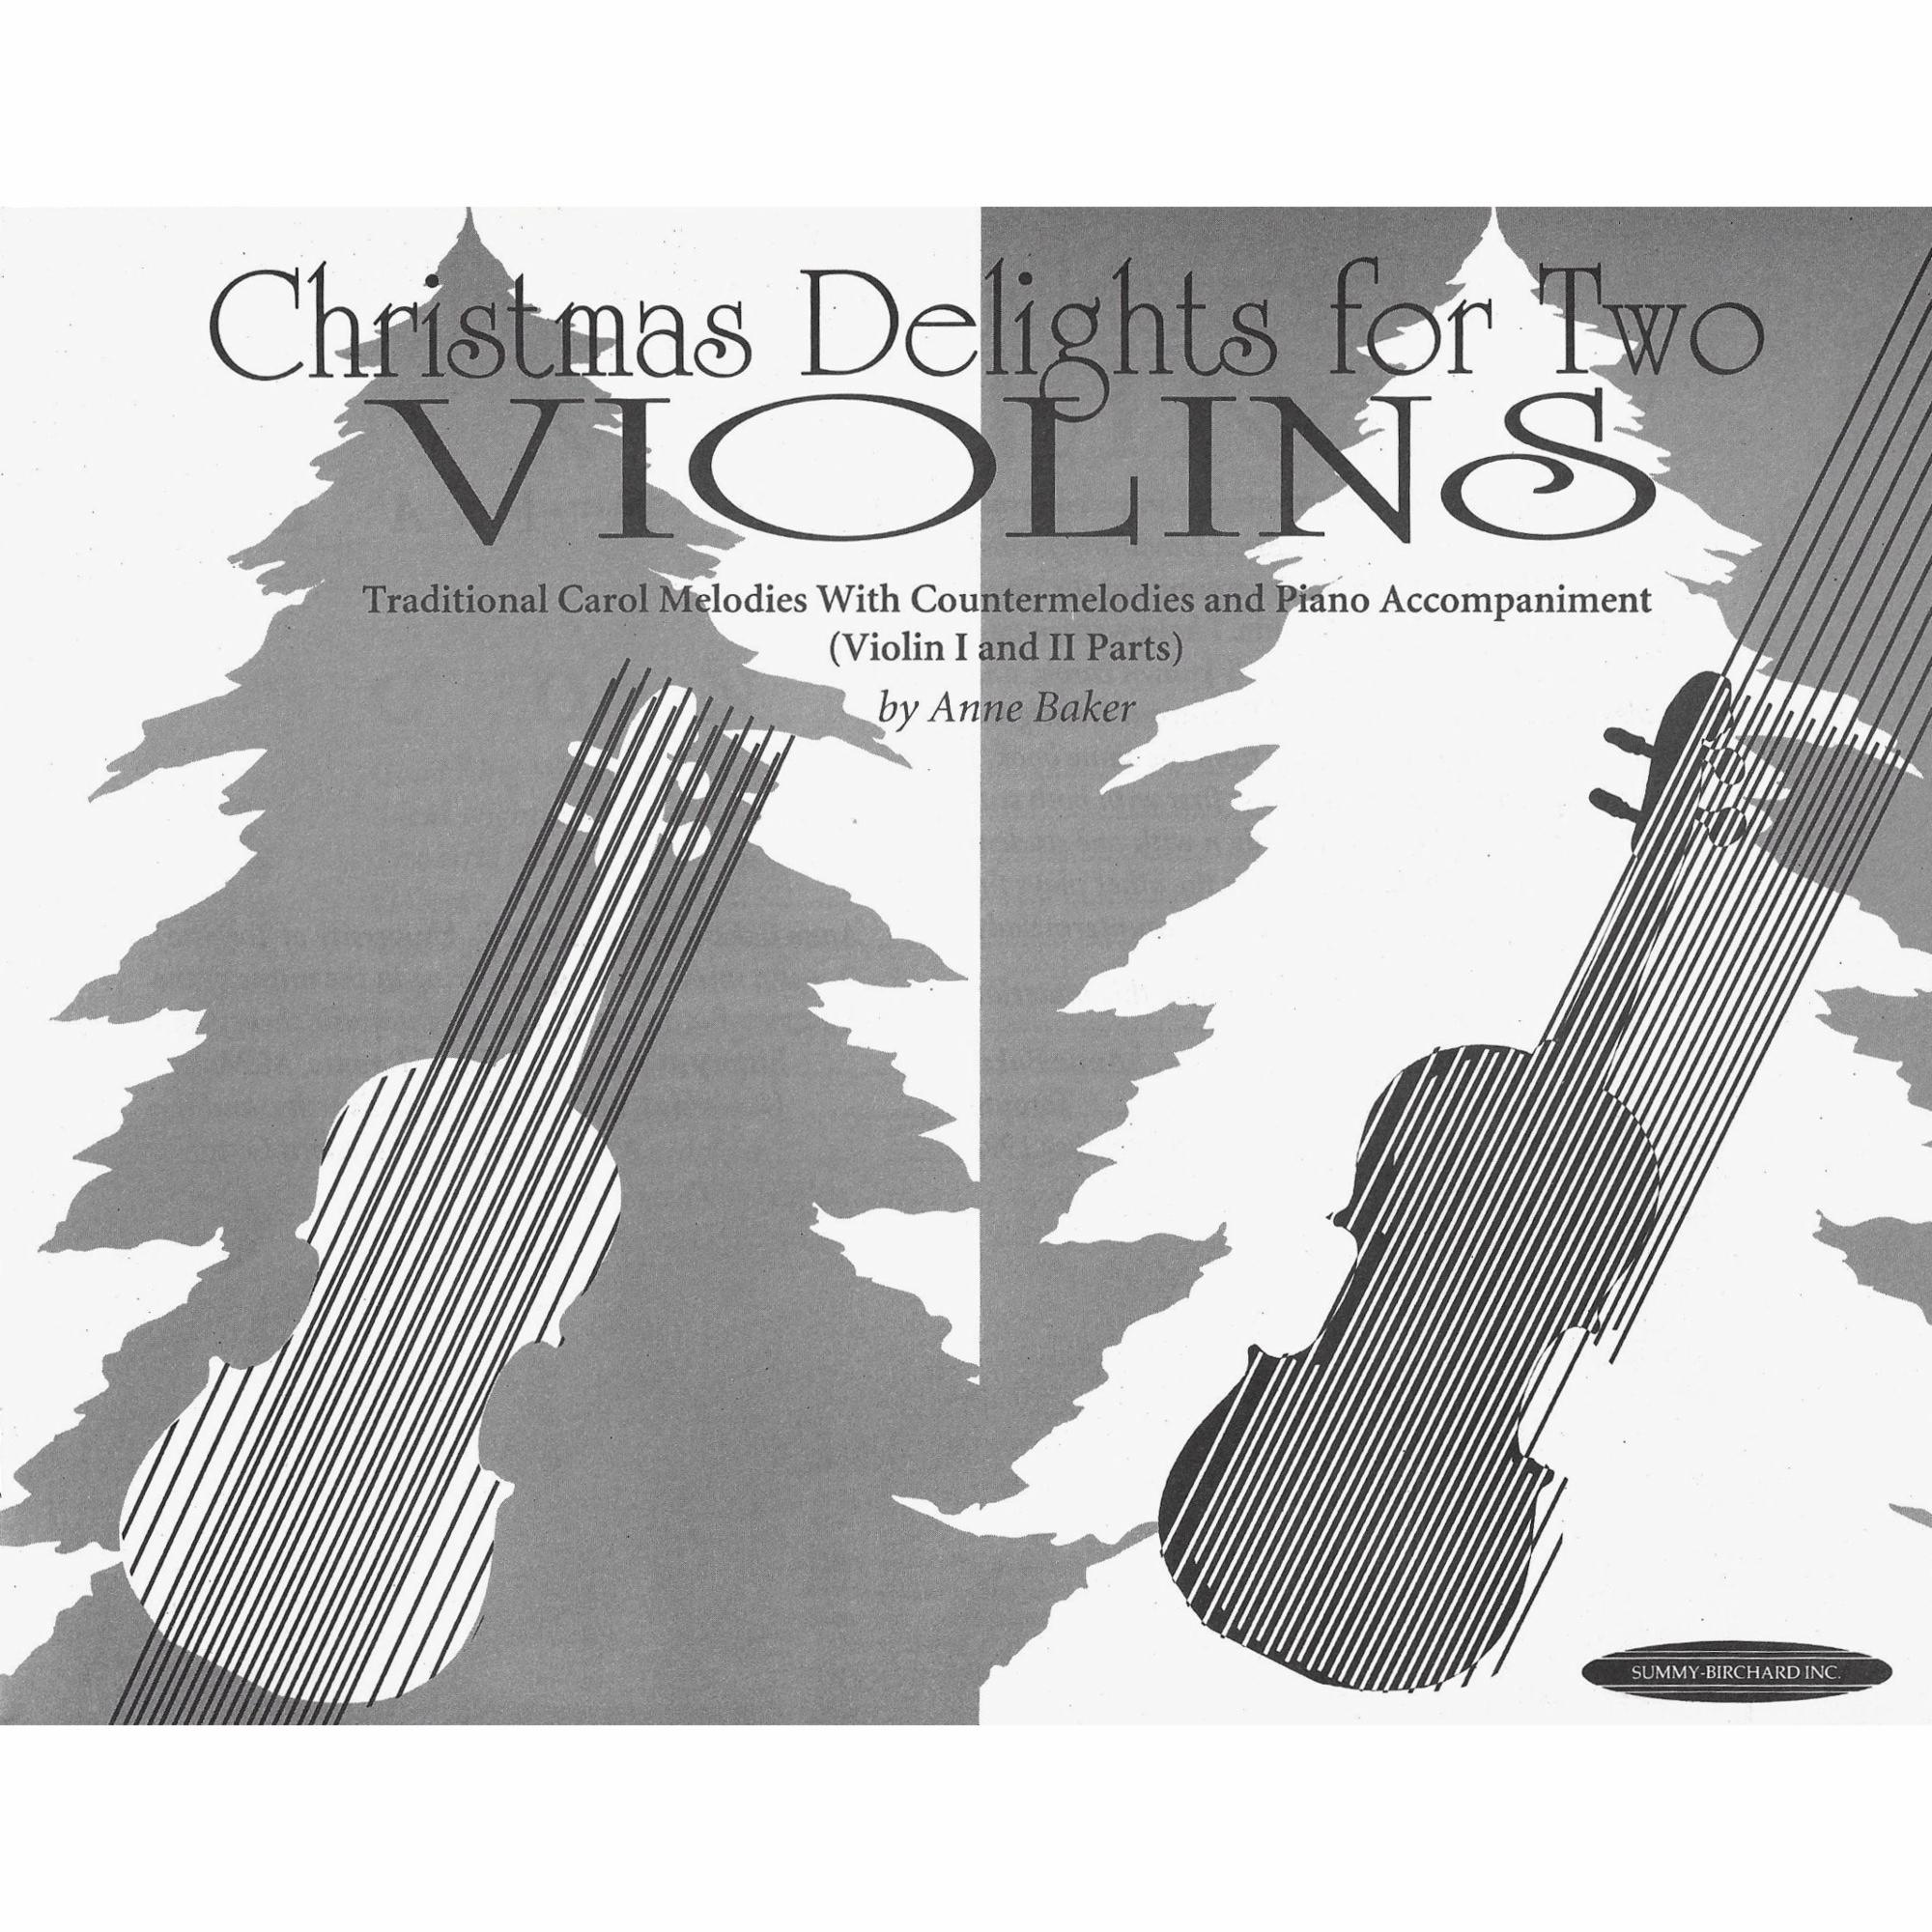 Christmas Delights For Two Violins